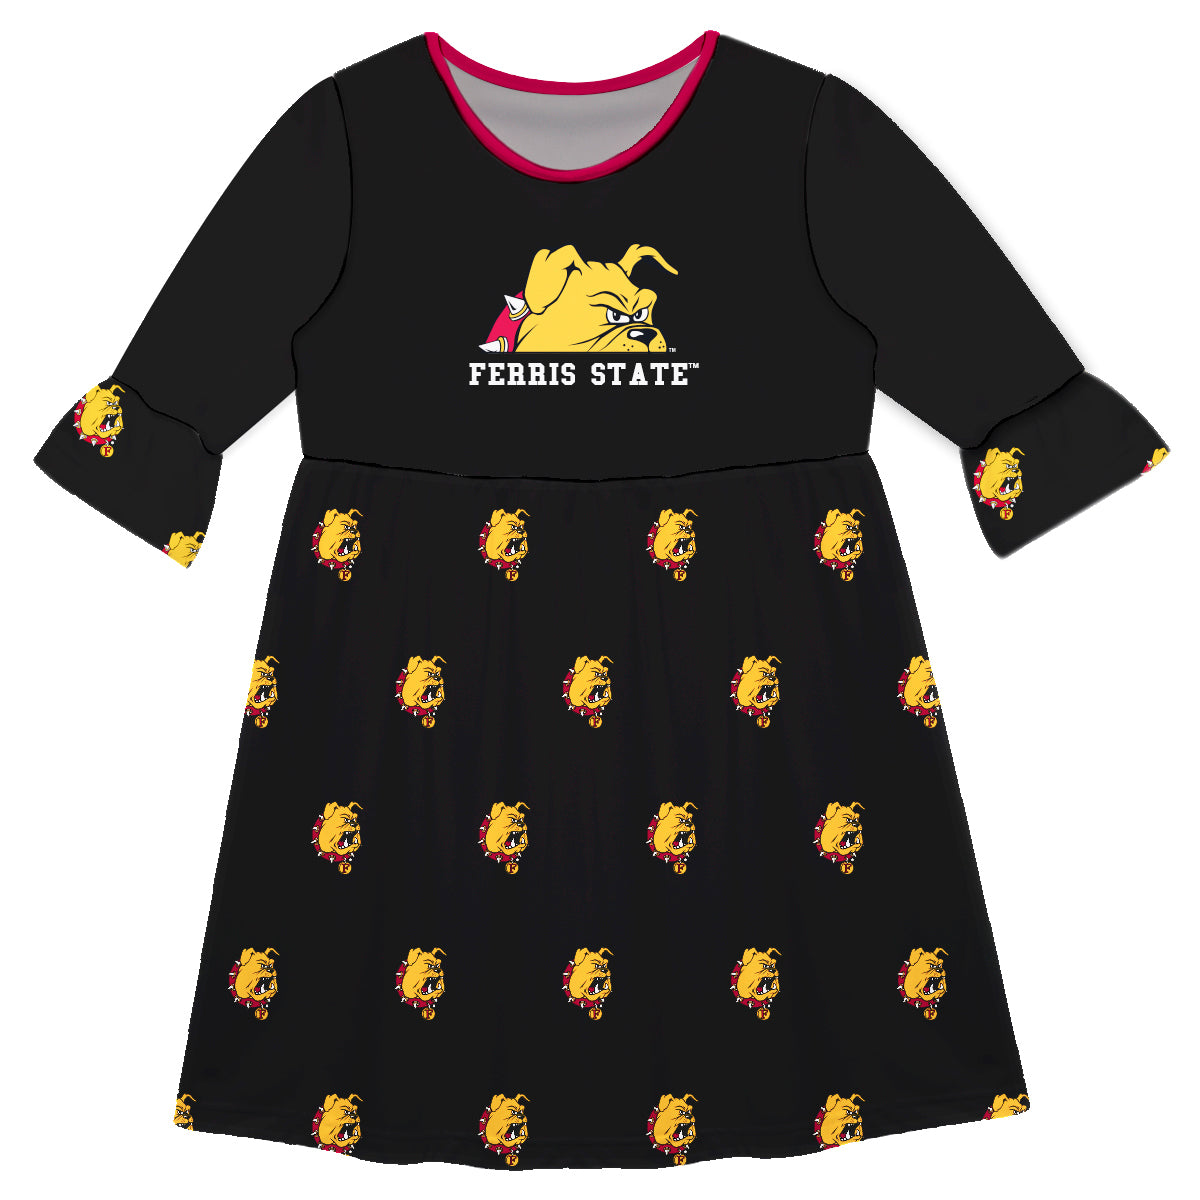 Ferris State University Bulldogs Girls Game Day 3/4 Sleeve Solid Black All Over Logo on Skirt by Vive La Fete-Campus-Wardrobe